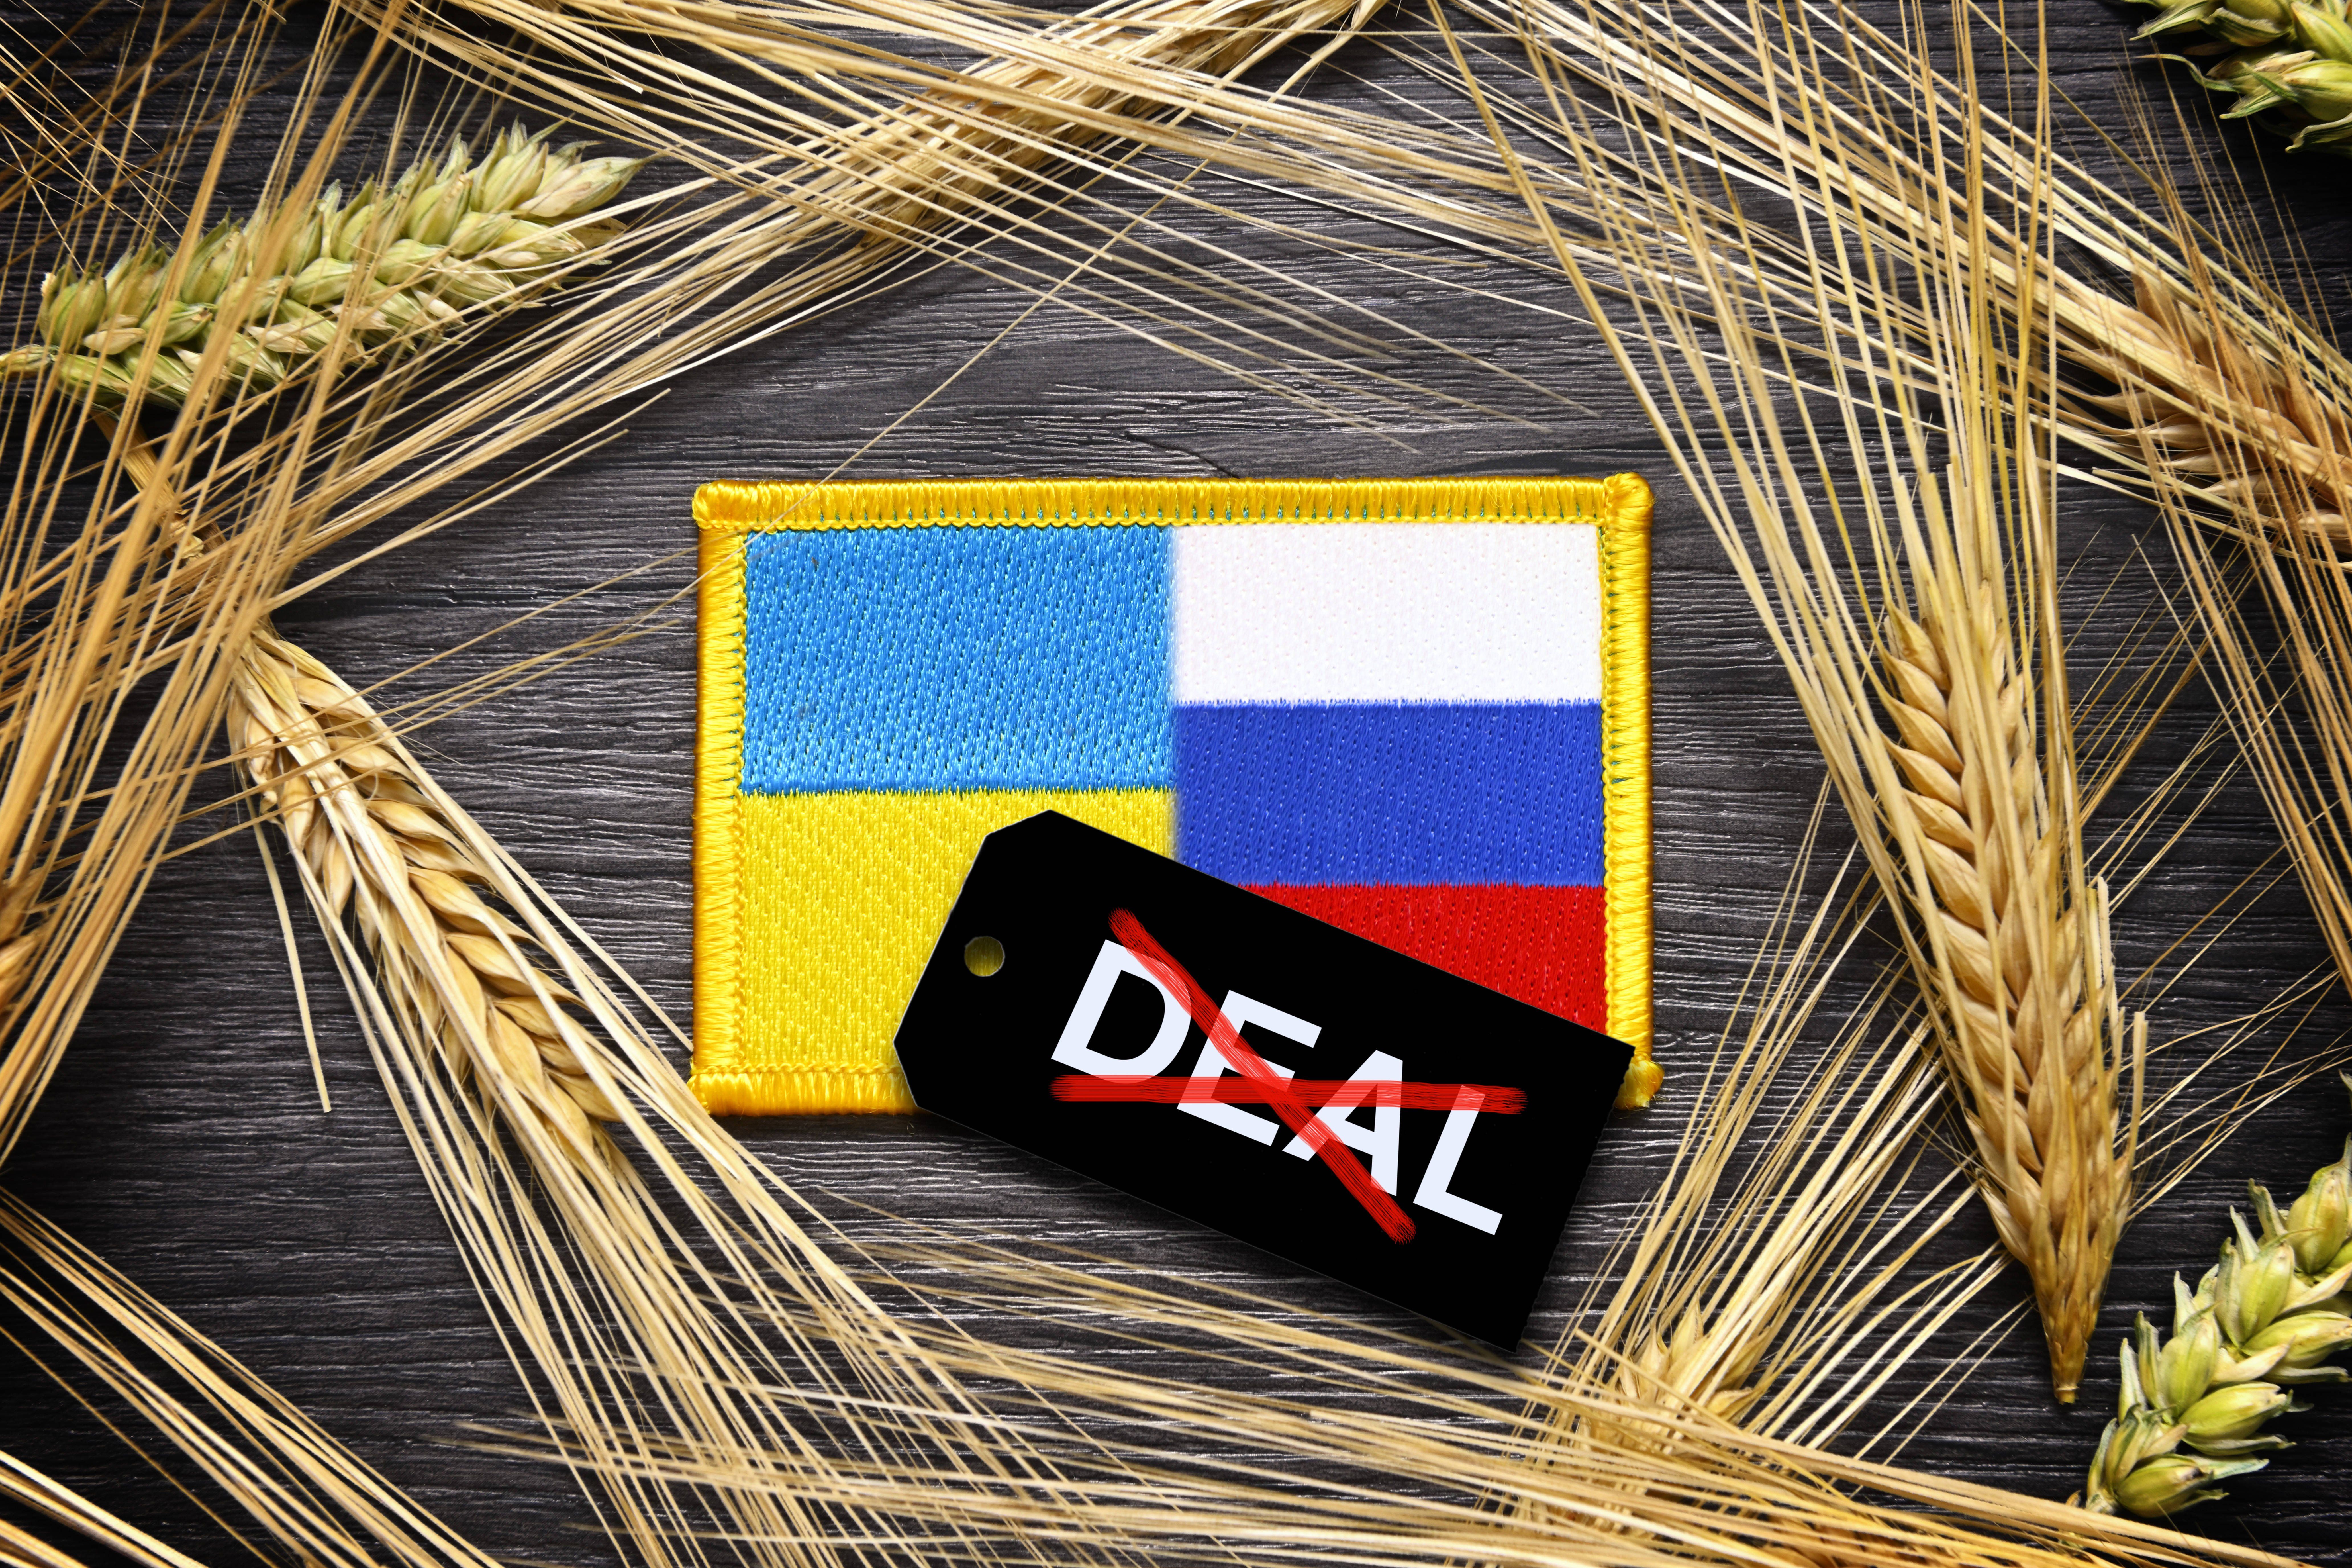 The flags of Ukraine and Russia surrounded by ears of grain and label with crossed-out inscription "Deal."